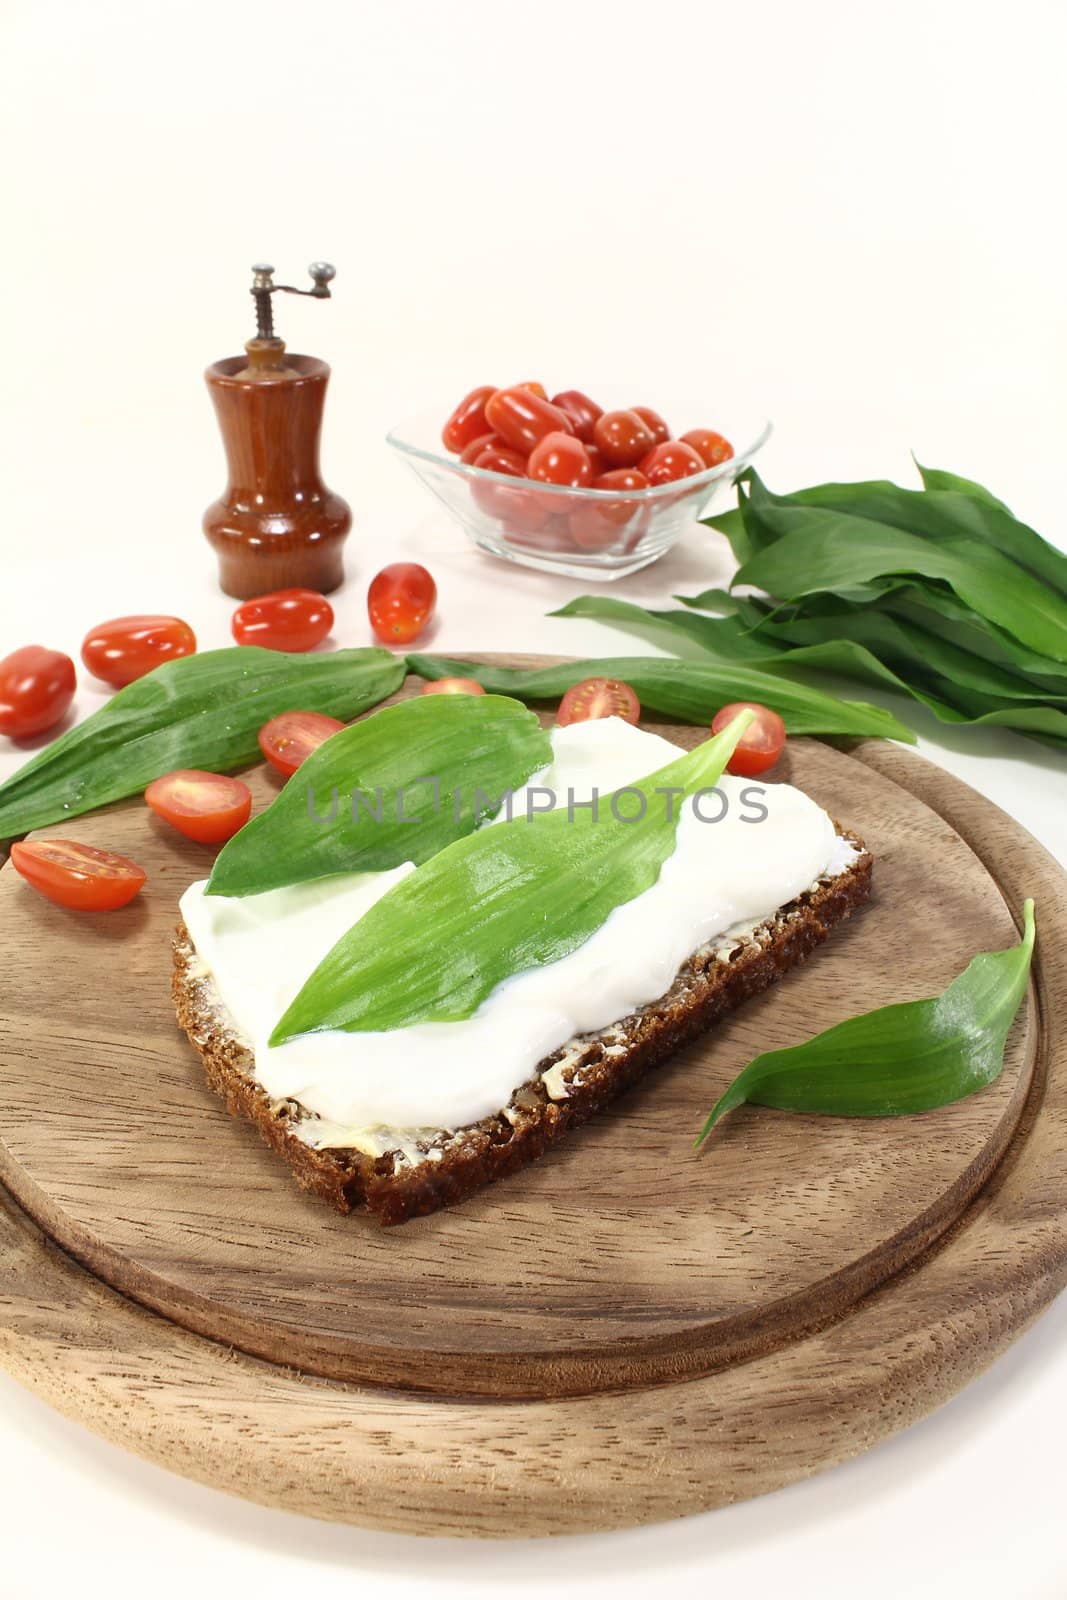 Slice of bread with cottage cheese, ramson and chopped tomatoes